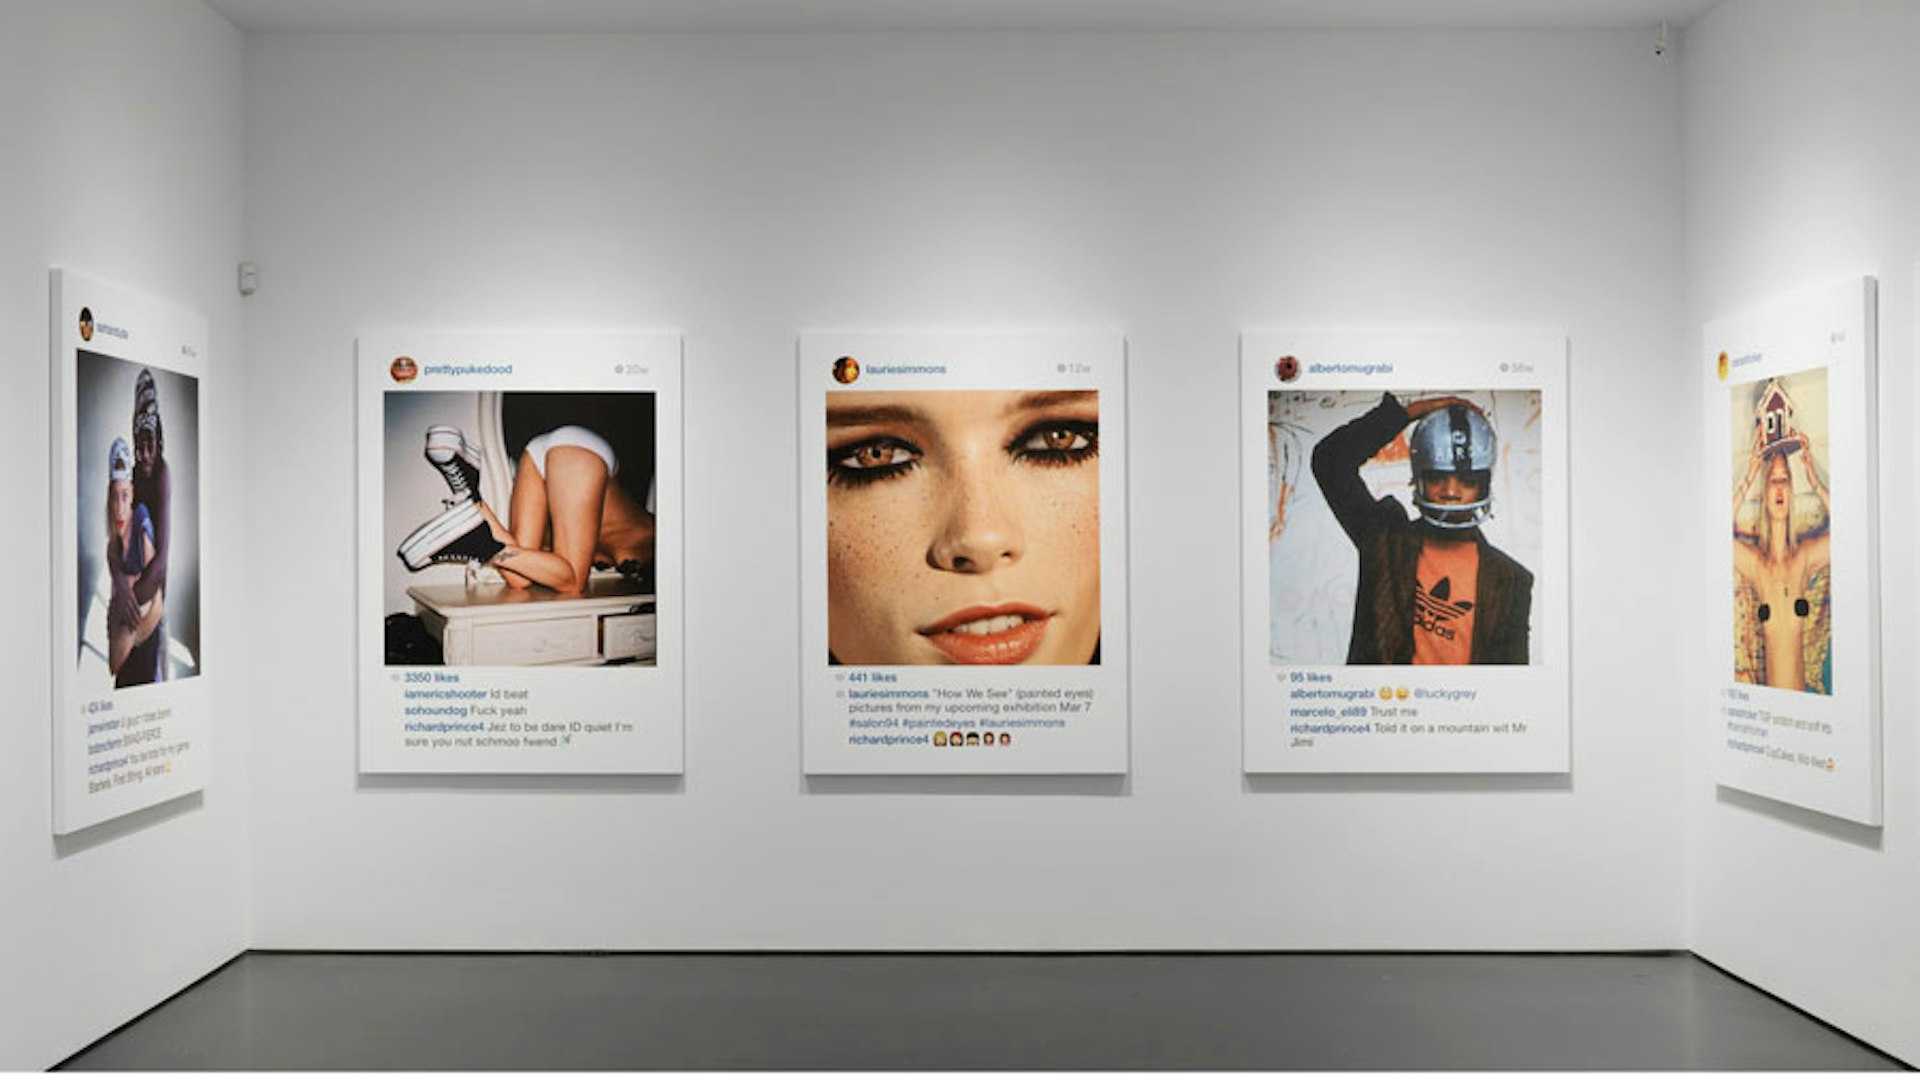 Richard Prince to Calcutta: The weird relationship between Instagram and the art gallery